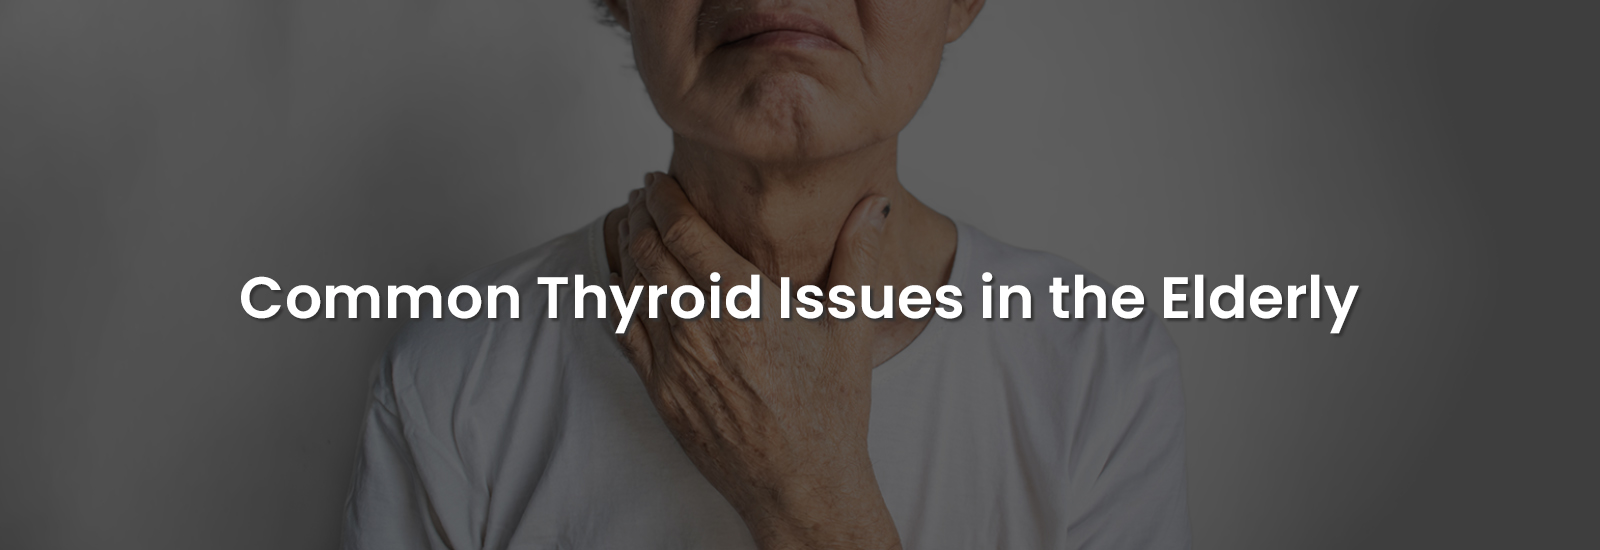 Common Thyroid Issues in the Elderly | Banner Image